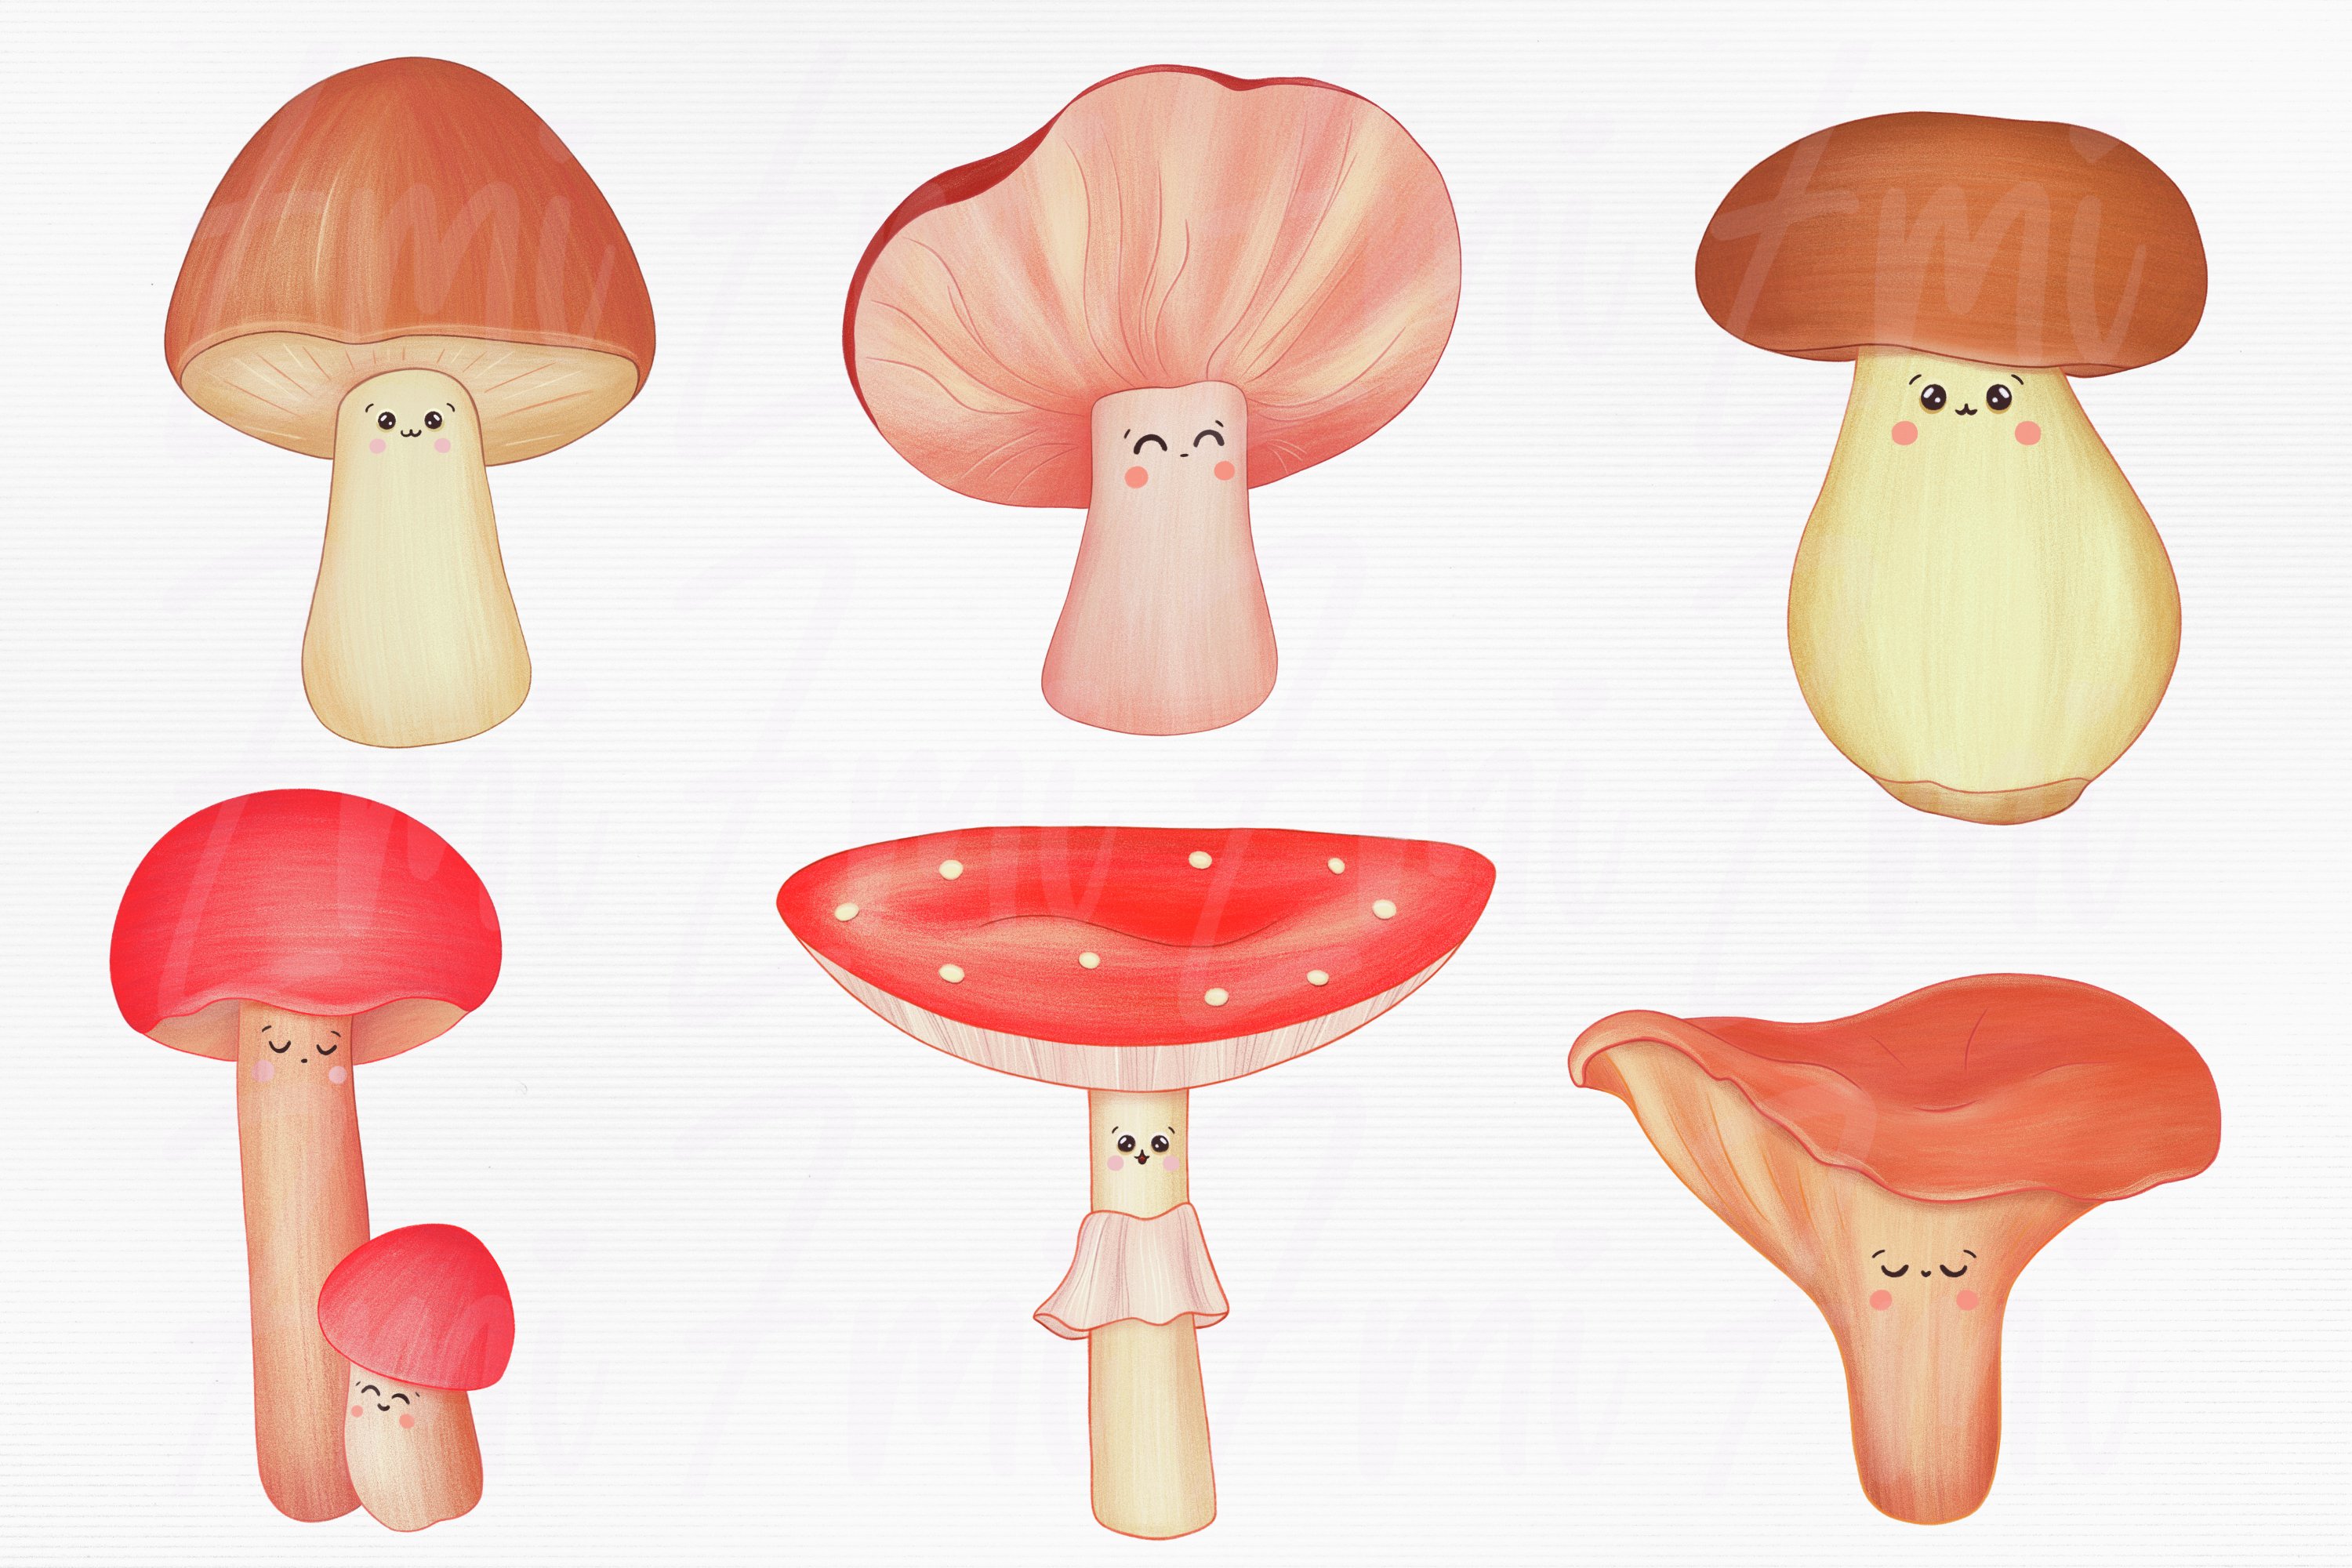 Bundle of 6 different cute mushrooms on a gray background.